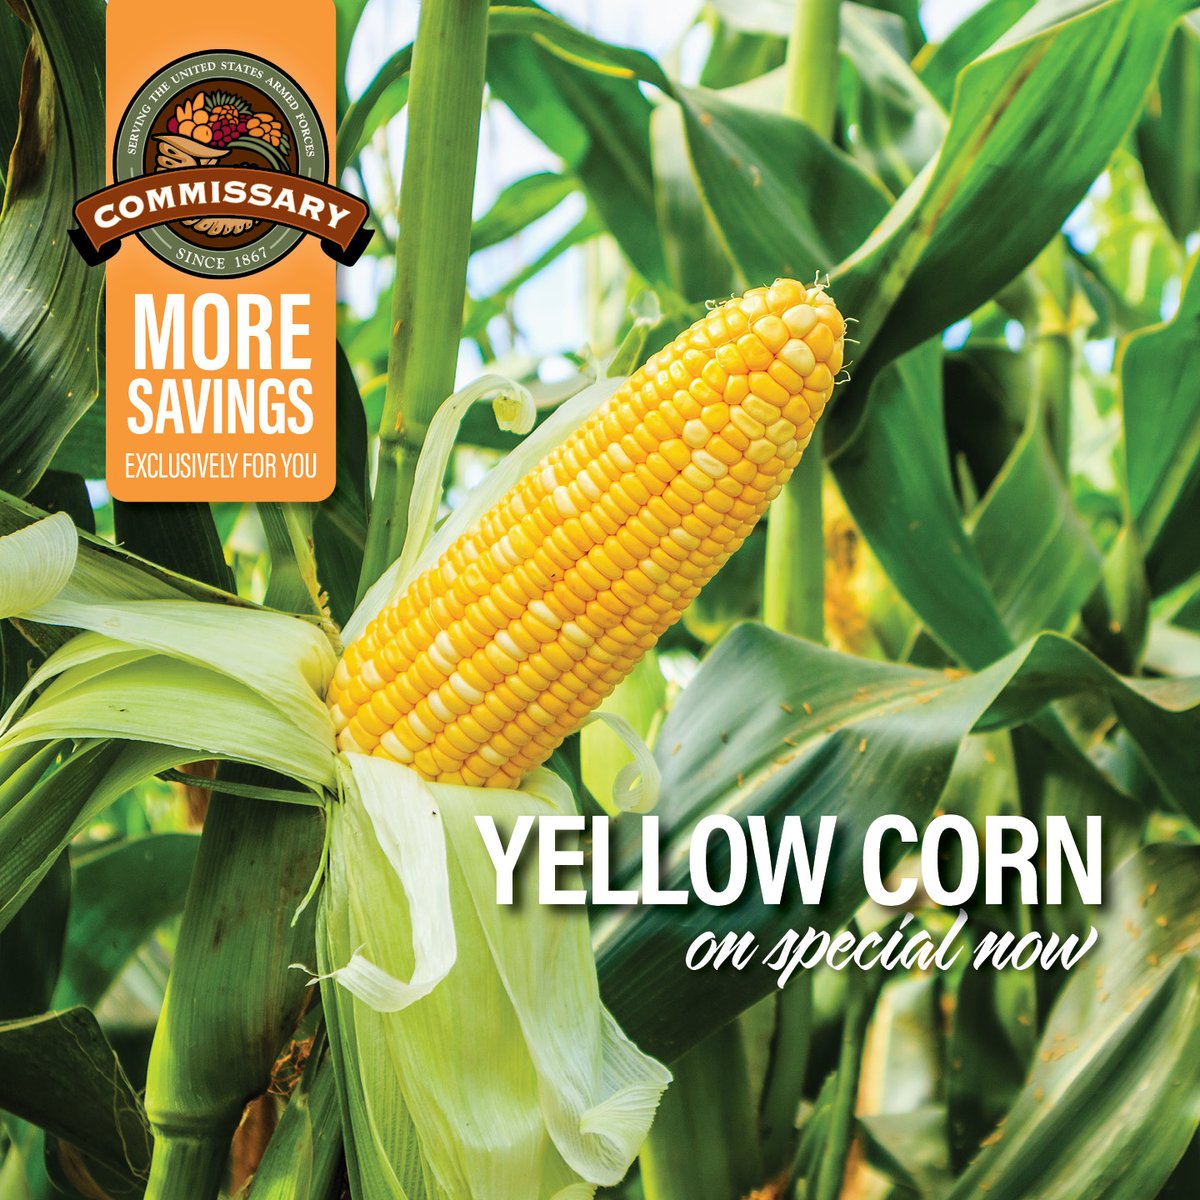 Craving that summertime sweetness? Head to your Commissary and snag some delicious yellow corn at unbeatable prices!  Don't miss out – visit us today: shop.commissaries.com

#CornOnTheCob #CommissarySavings #SummerFlavors